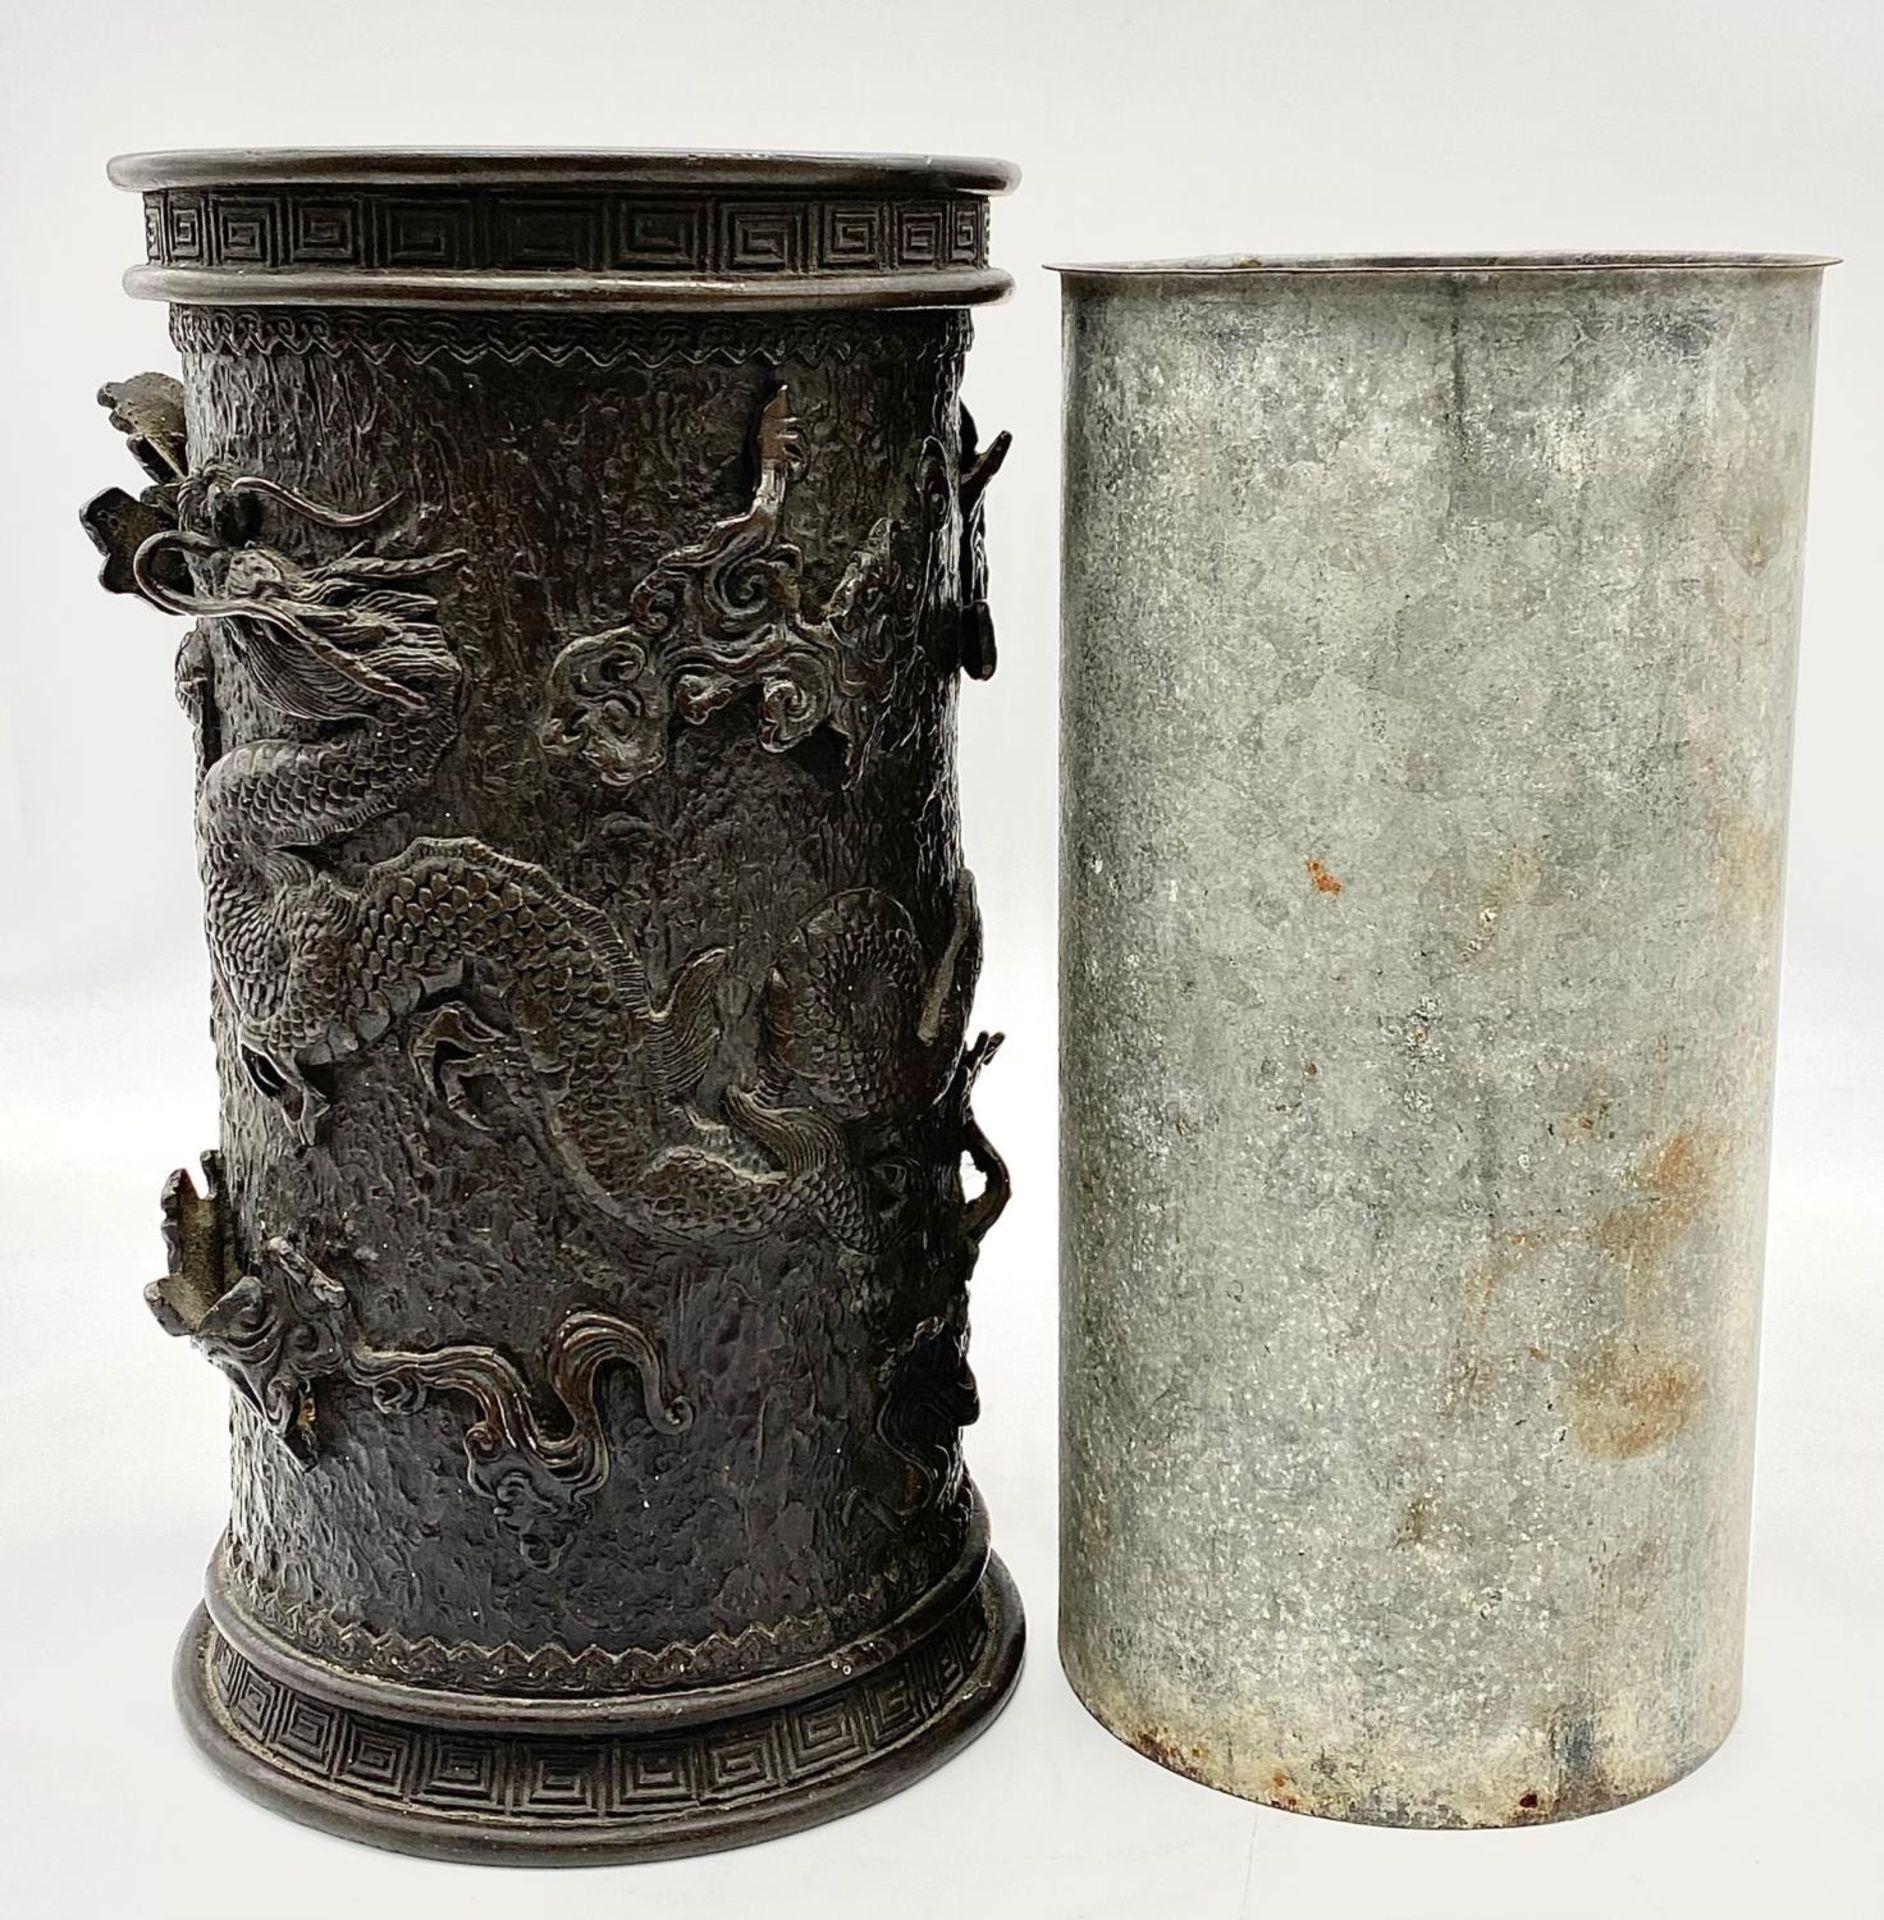 A Rare Unusual Antique Chinese Large Brush Pot Holder with Original Metal Liner. Relief dragon